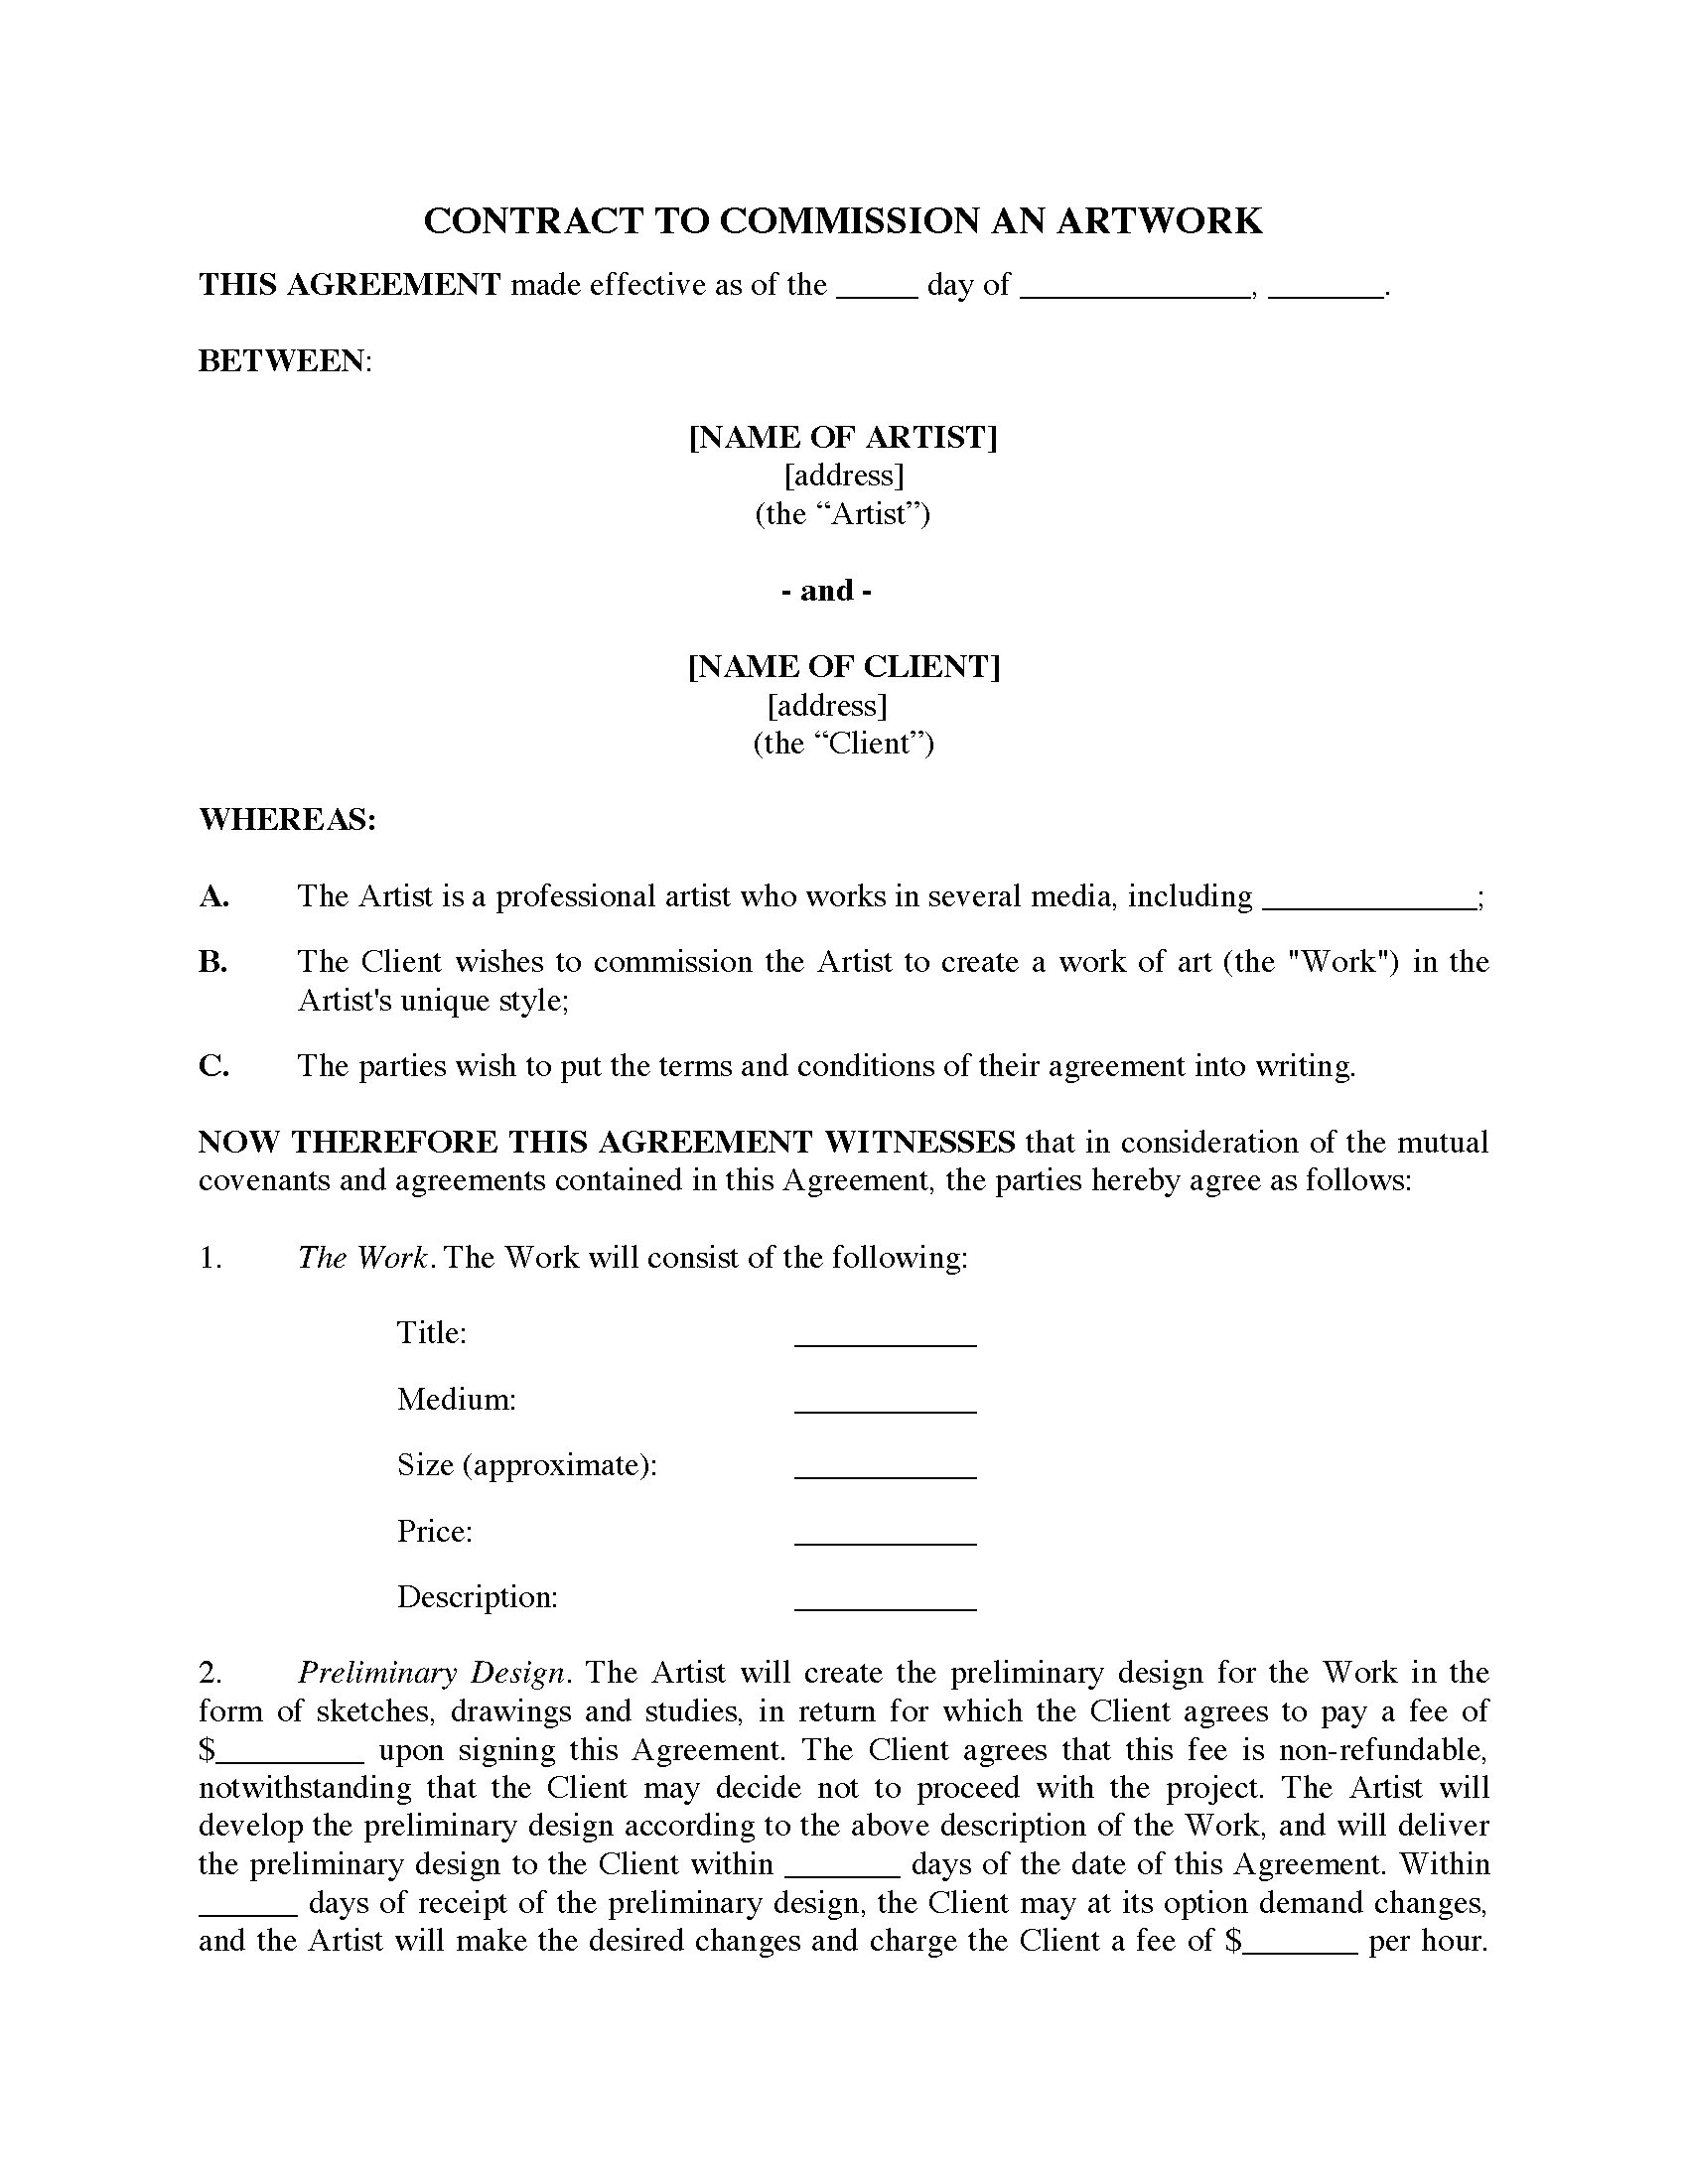 Artist Commission Contract Template Commission Contract for original Art Legal forms and